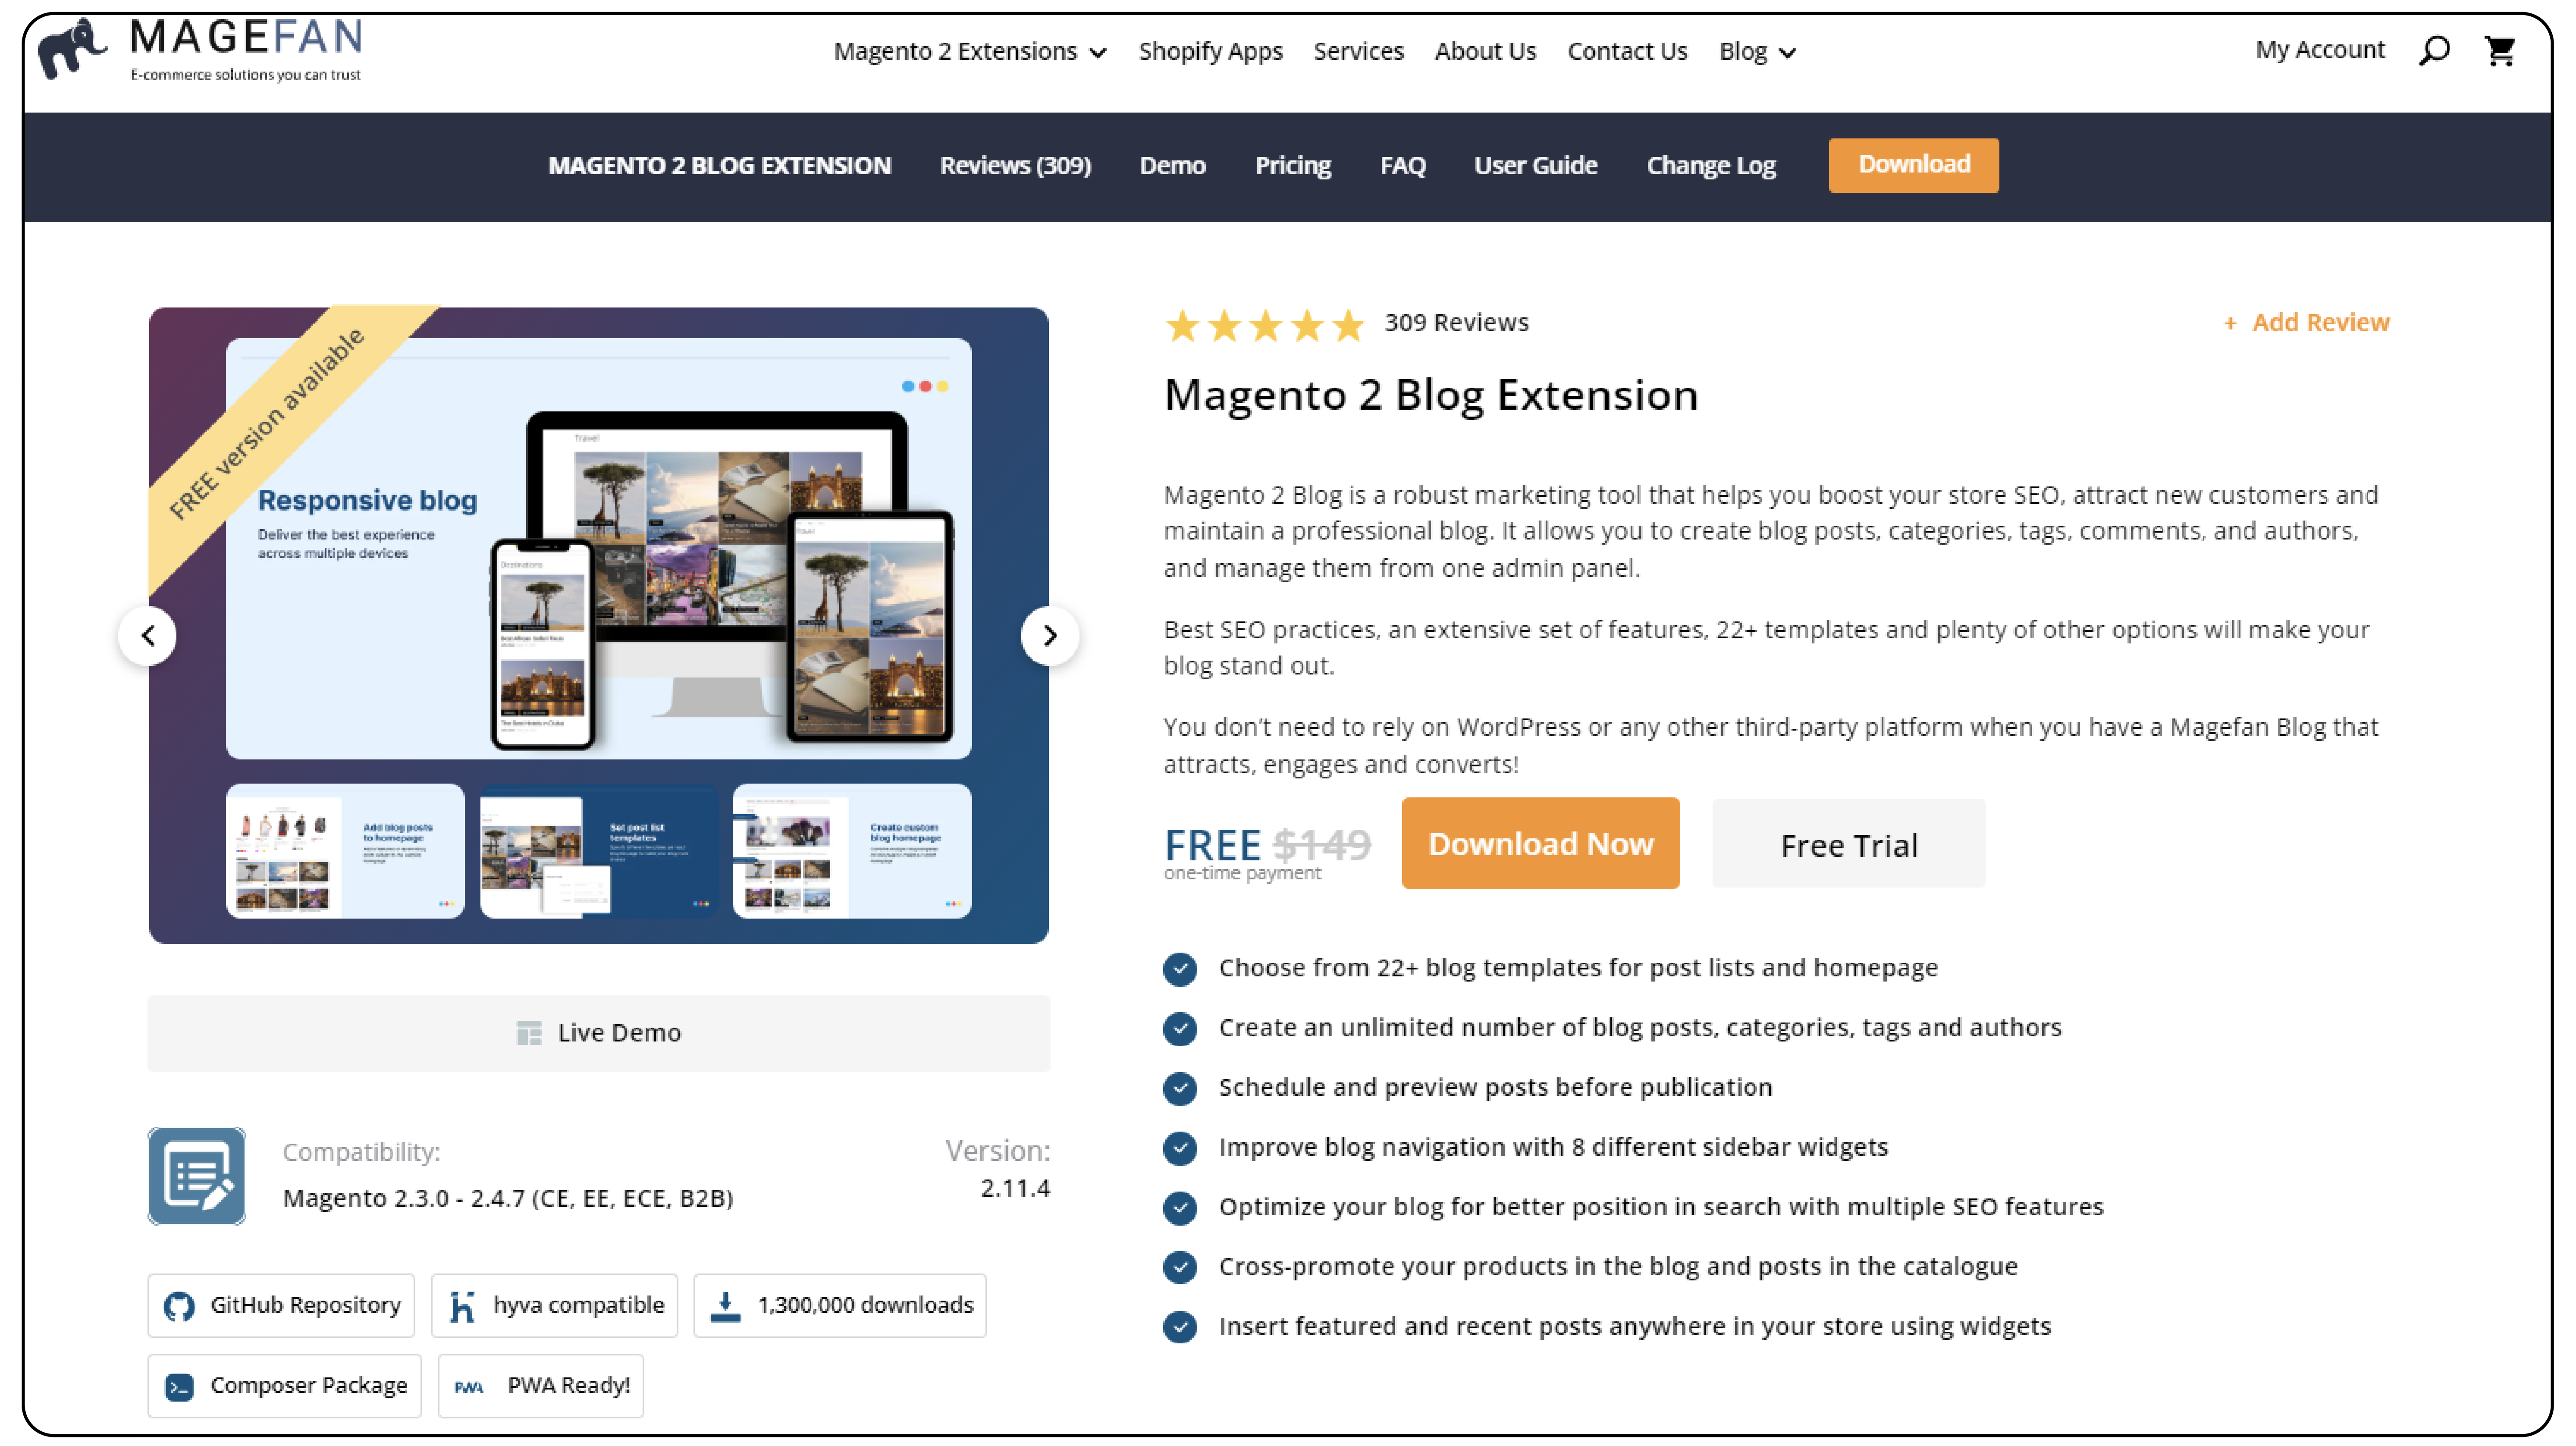 Magento 2 Blog Extension by Magefan